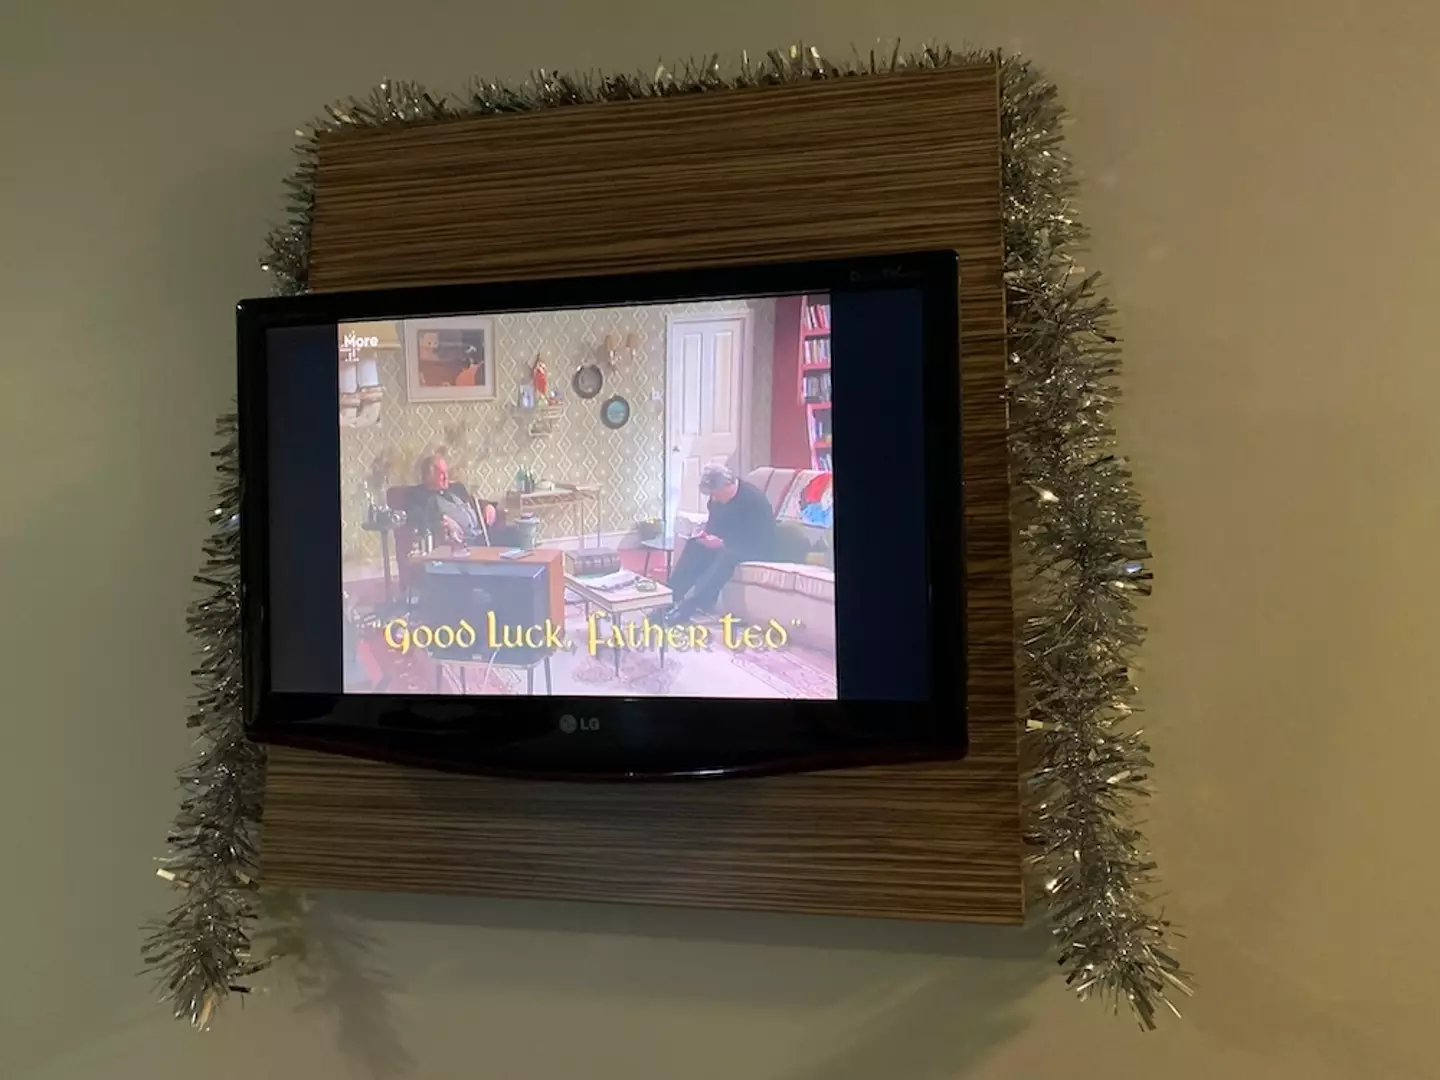 It wouldn't be Christmas without a bit of comforting telly.